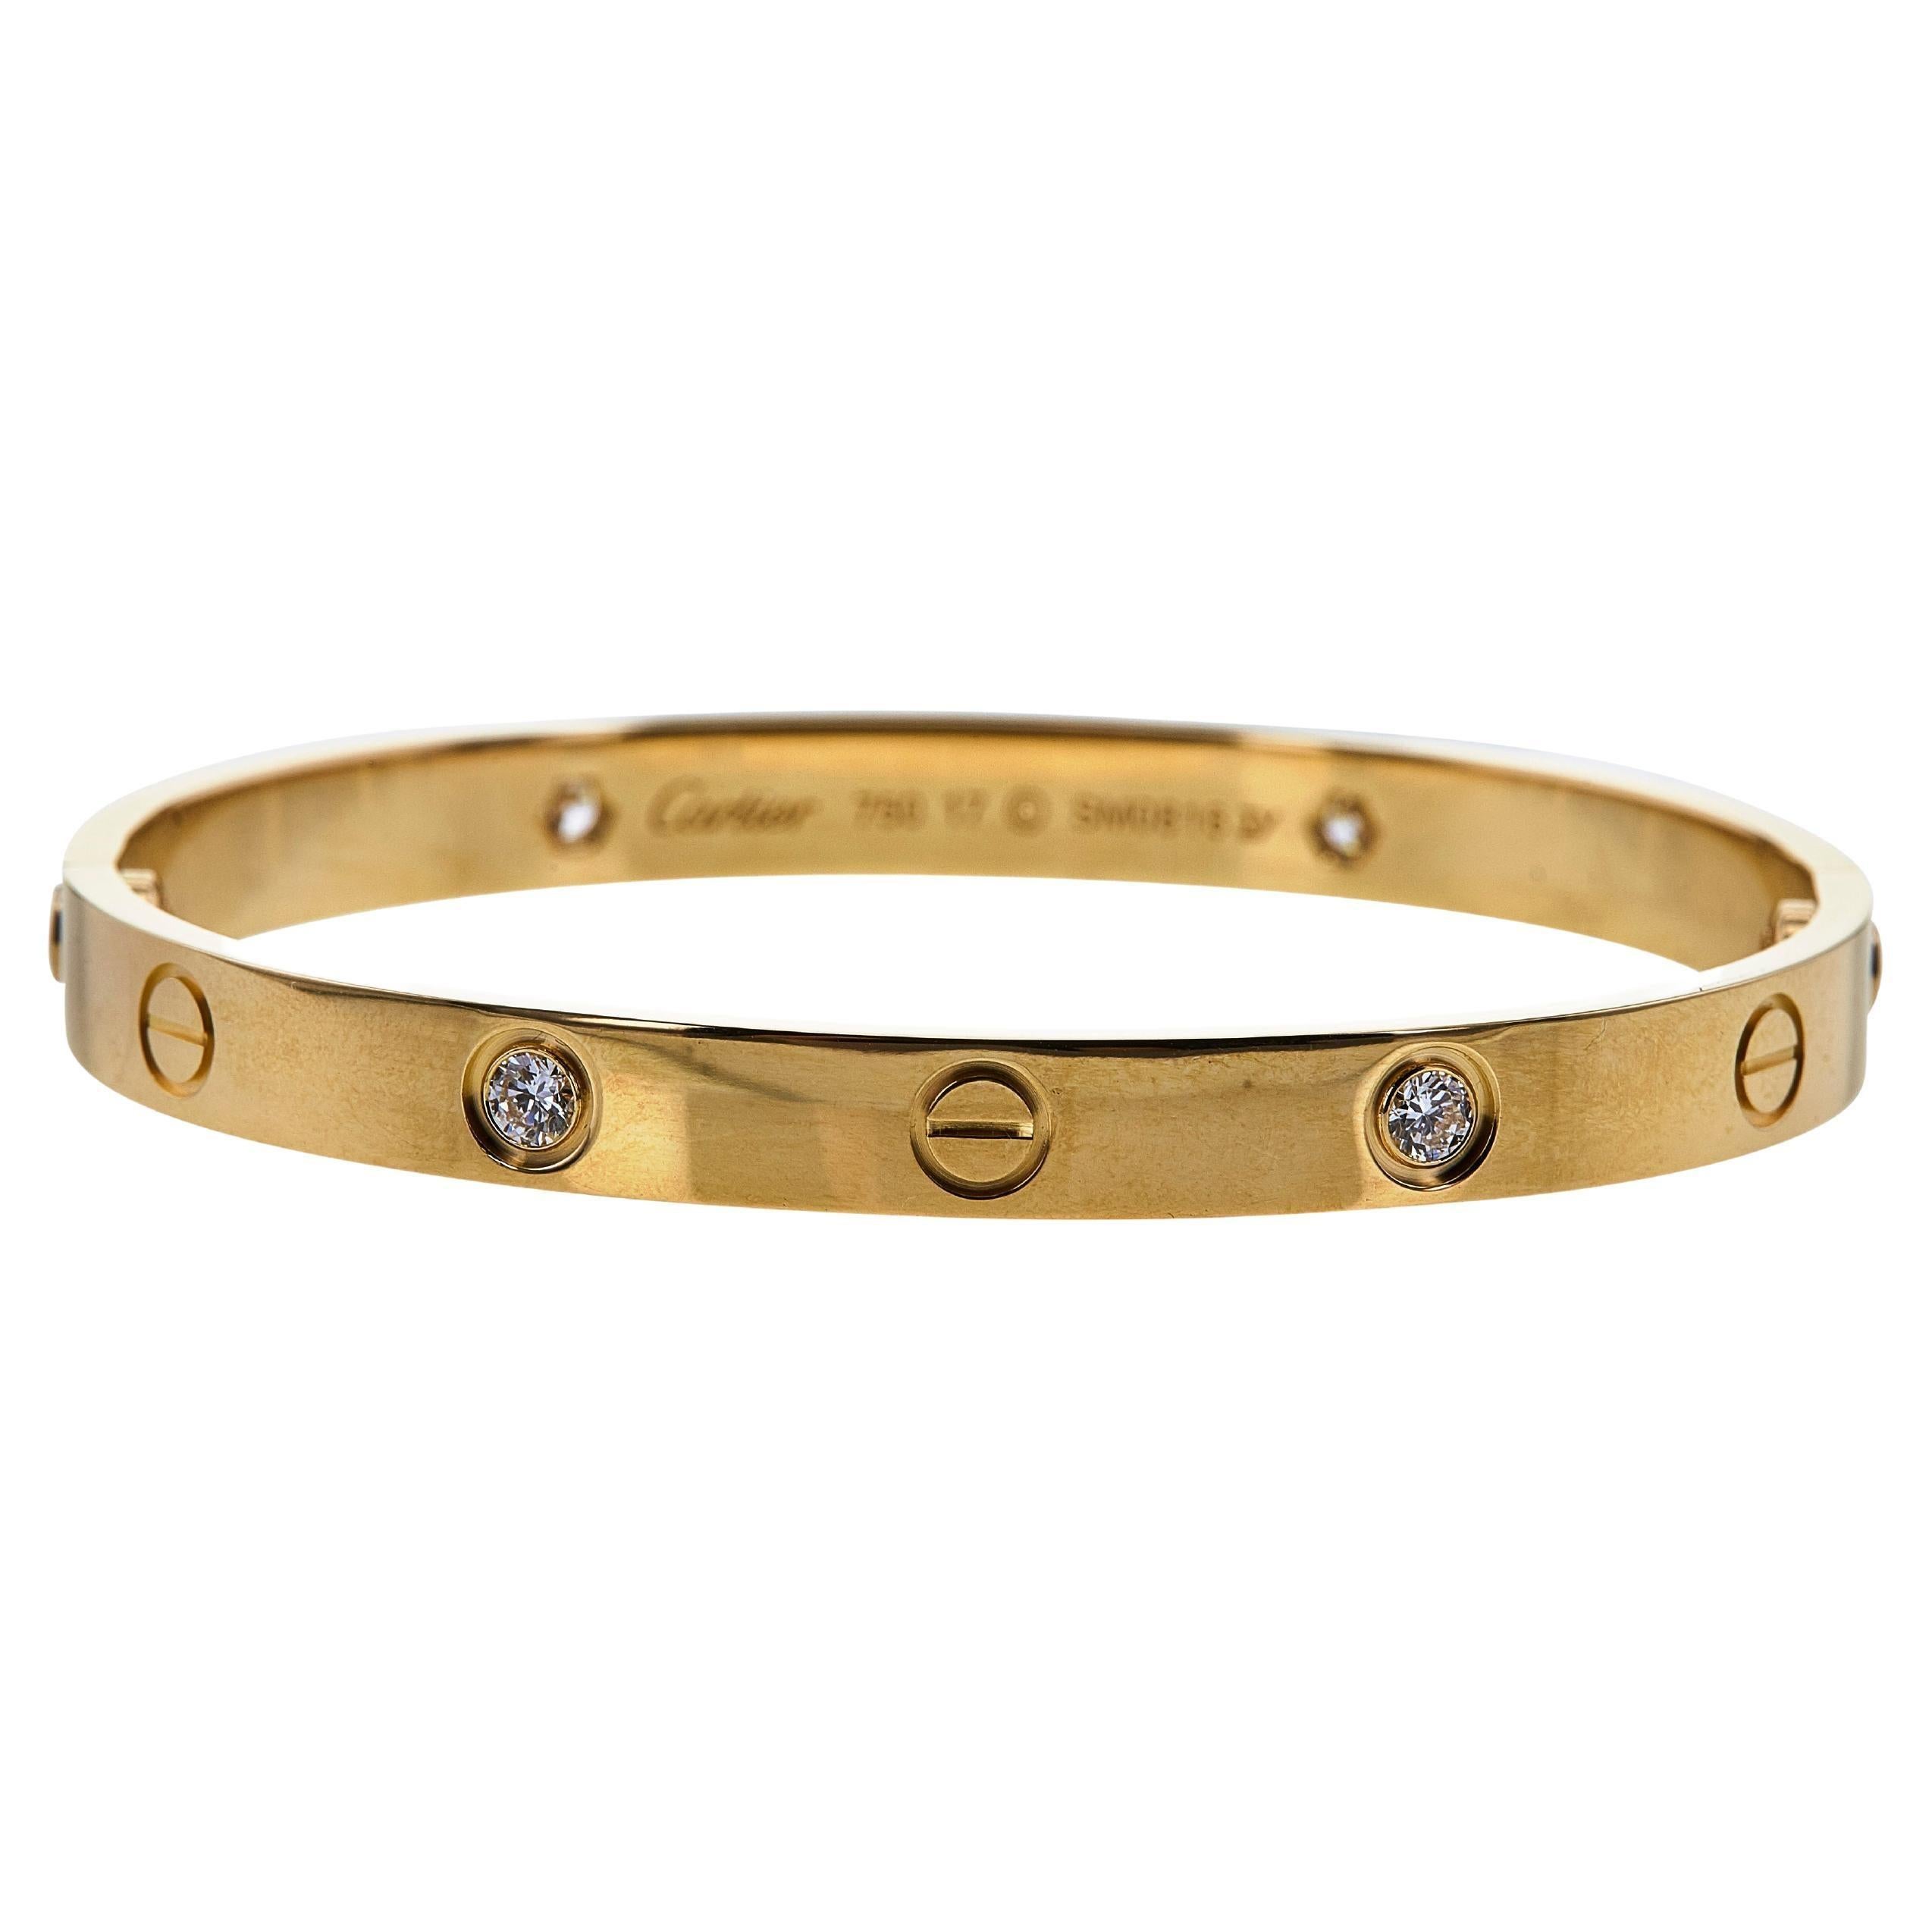 Authentic Cartier 'Love' bracelet crafted in 18 karat yellow gold, set with four round brilliant cut diamonds weighing an estimated 0.42 carats total weight. Size 17. Signed Cartier, 750, with serial number and hallmarks. The bracelet is presented